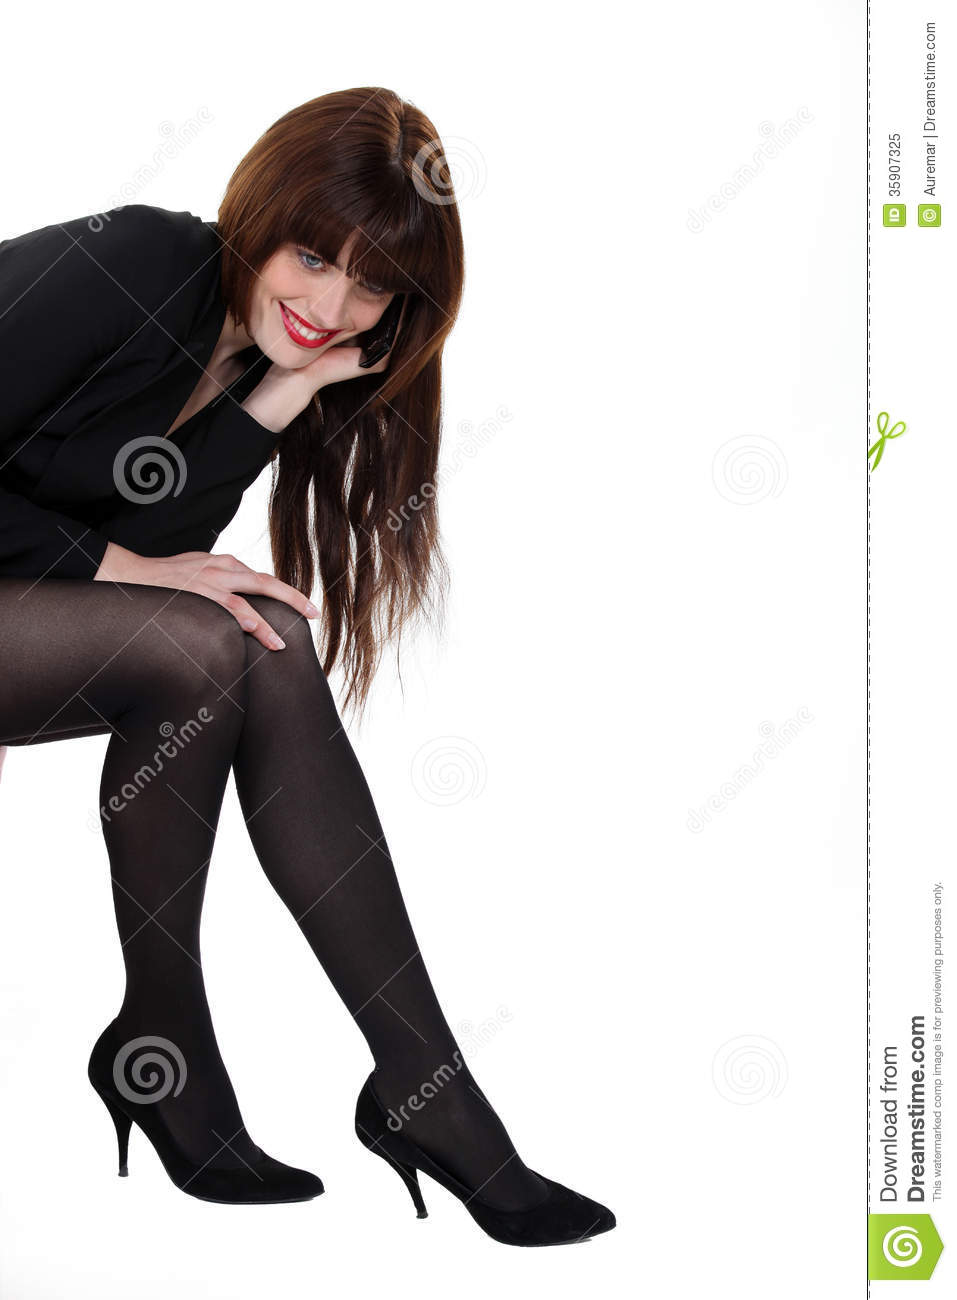 Sexy Woman With Shapely Legs Royalty Free Stock Photo   Image